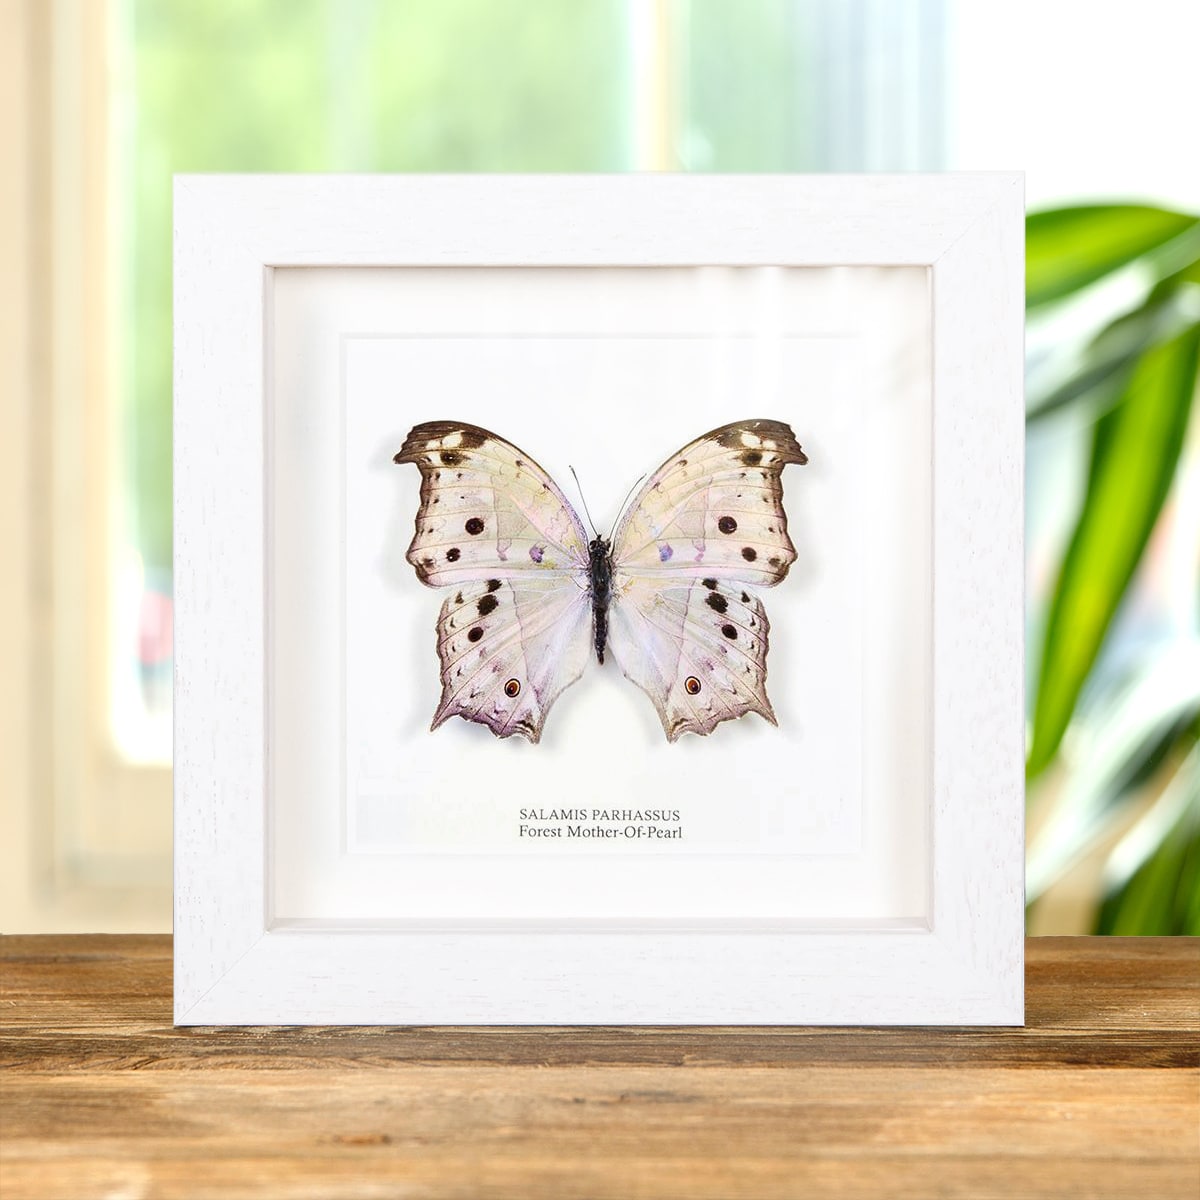 Forest Mother-Of-Pearl Butterfly in Box Frame (Salamis parhassus)